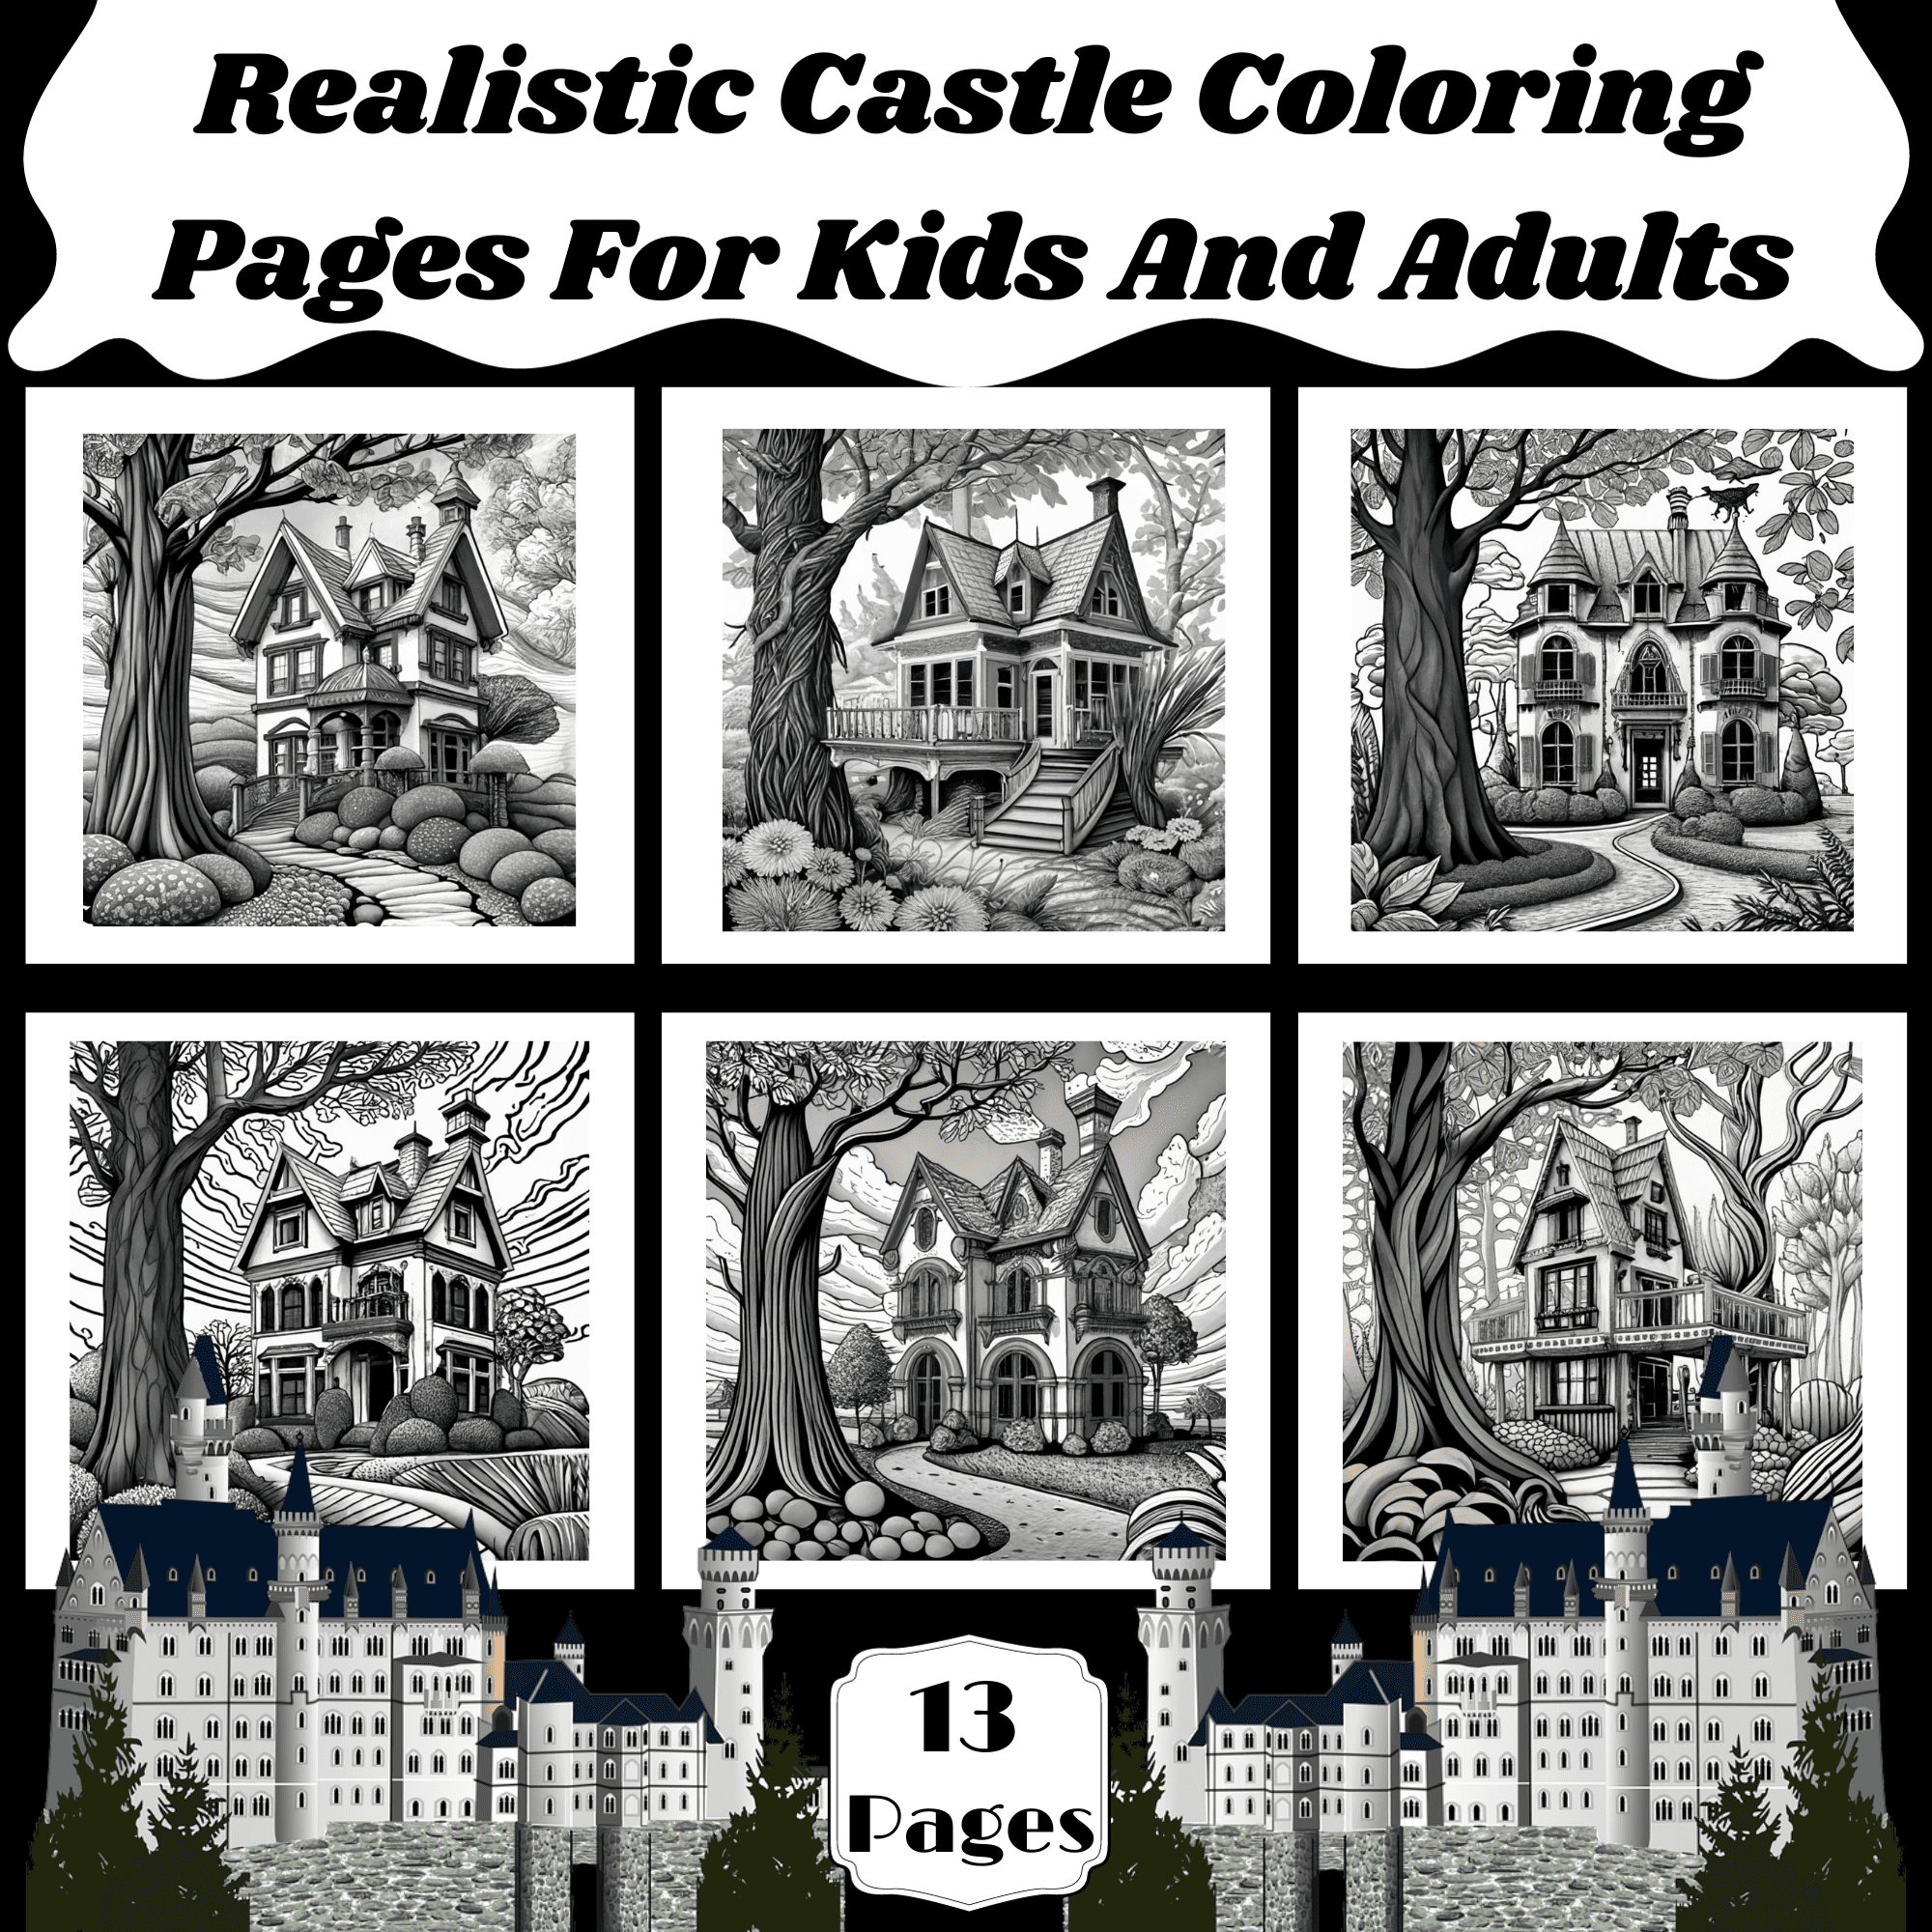 Realistic castle coloring pages for kids and adults made by teachers